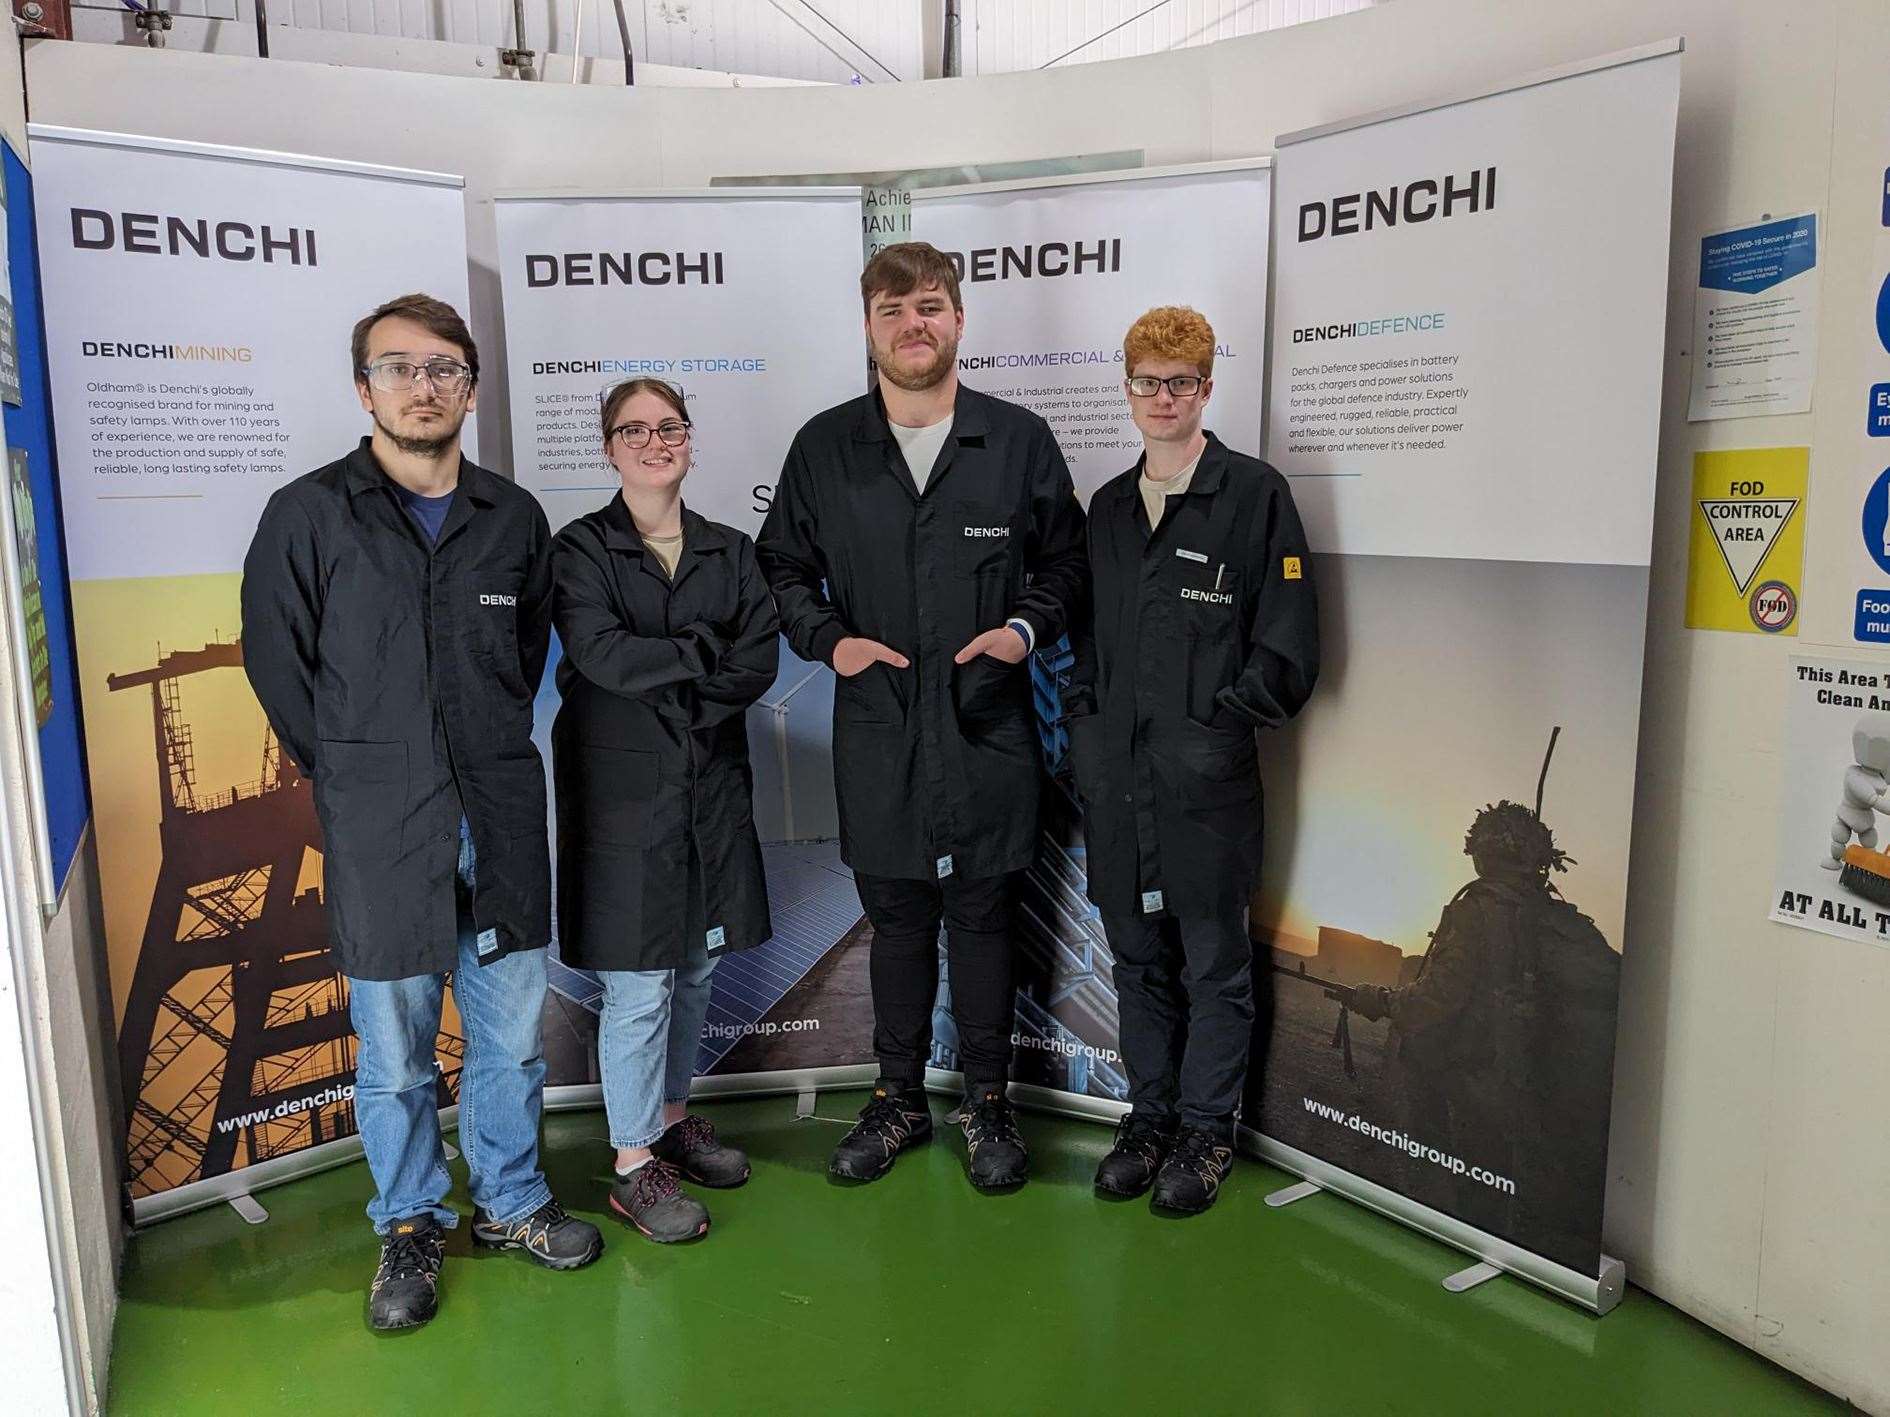 Four students are on placement at the Denchi battery firm in Thurso. They are from left: Aaron, Charlotte, Jason and Finlay